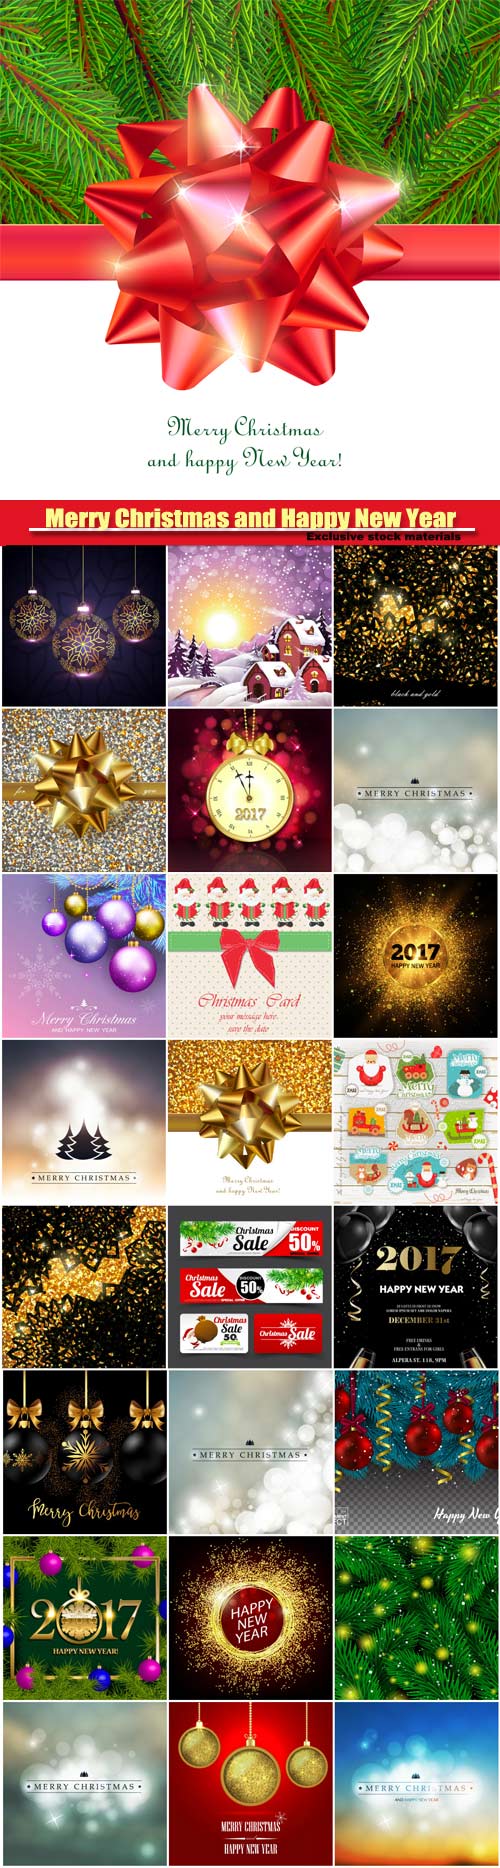 Merry Christmas and Happy New Year vector, festive background for greeting card, shiny decorative sign